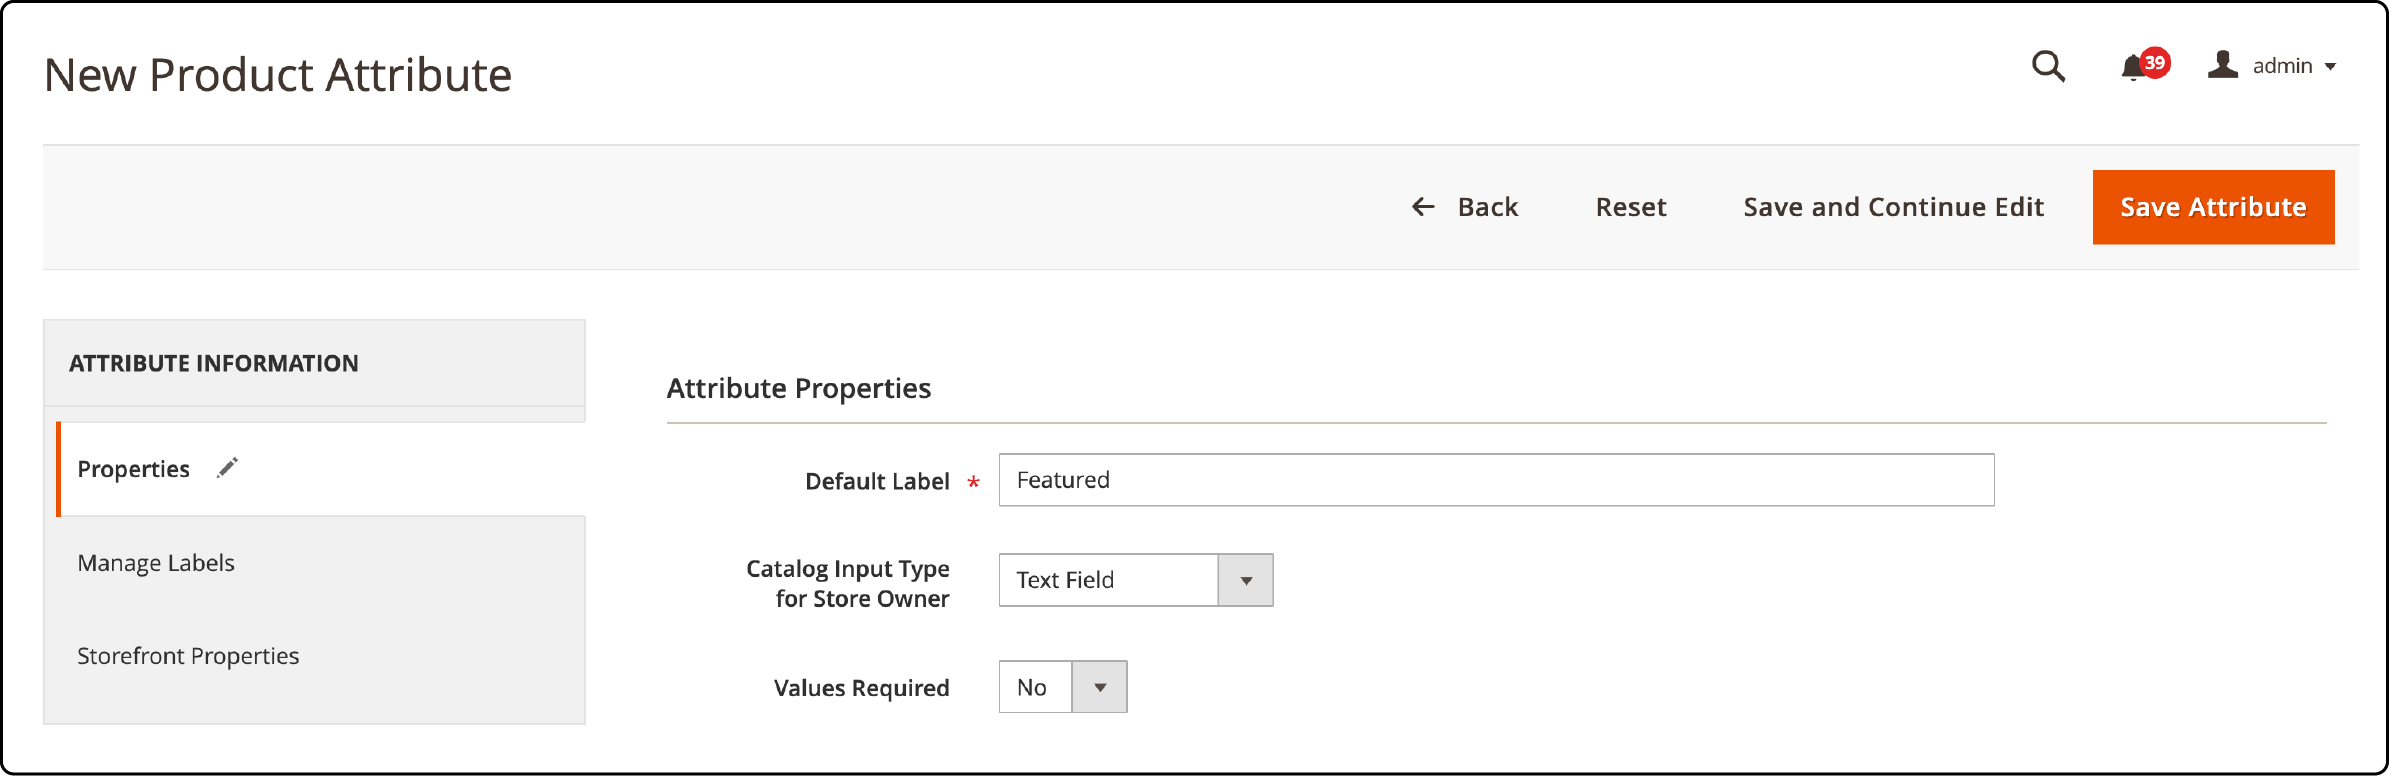 Setting the default label for featured products in Magento 2